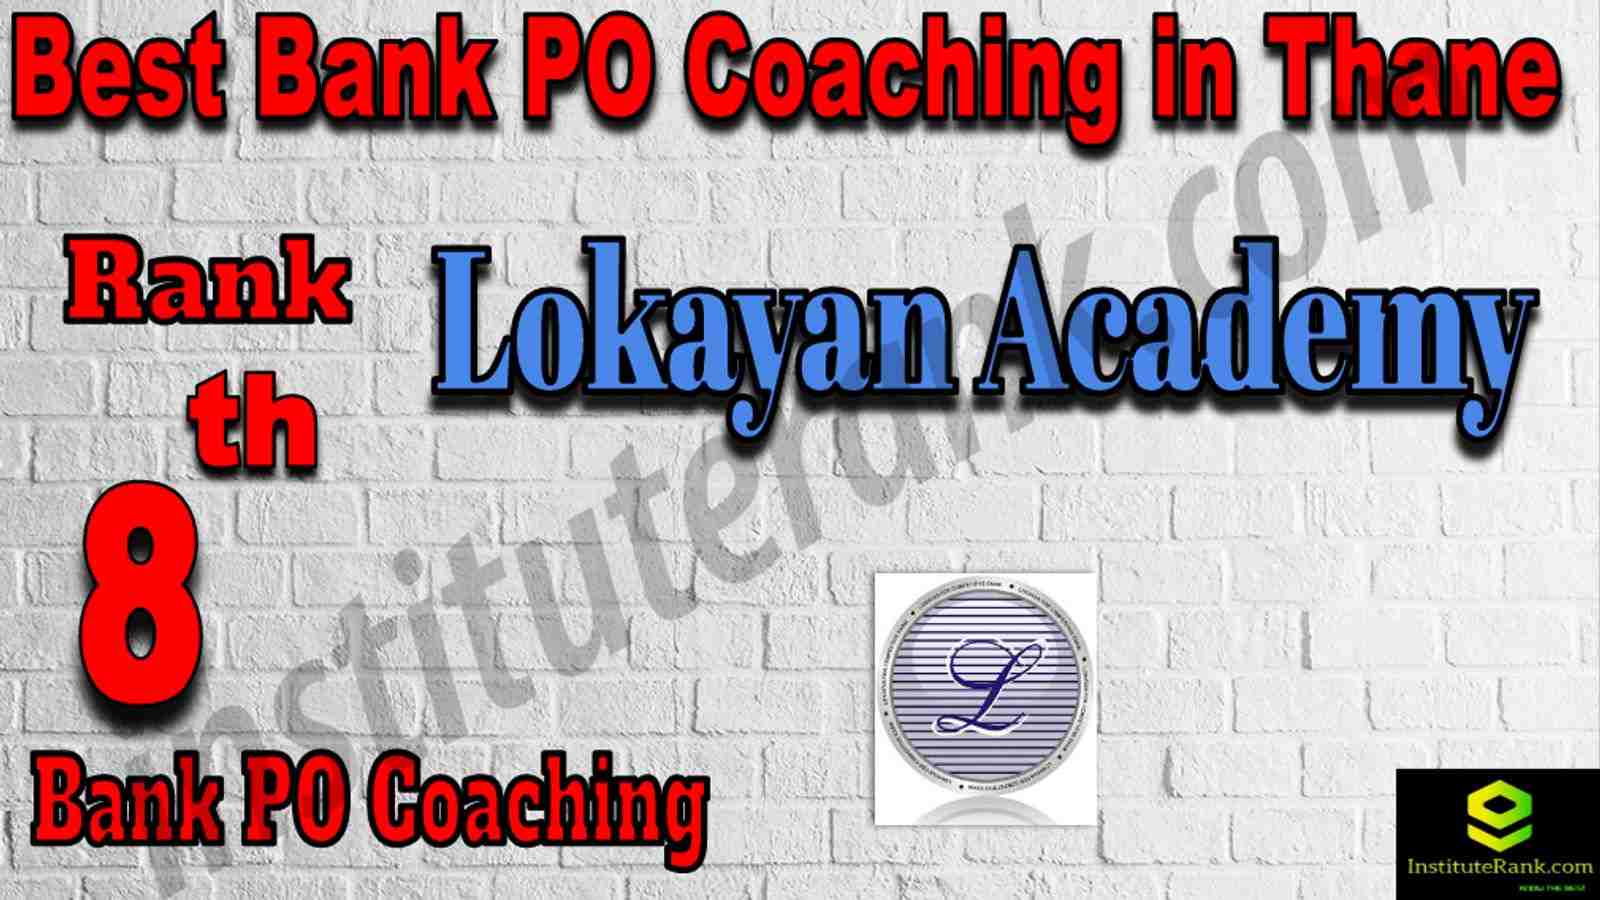 8th Best Bank PO Coaching in Thane